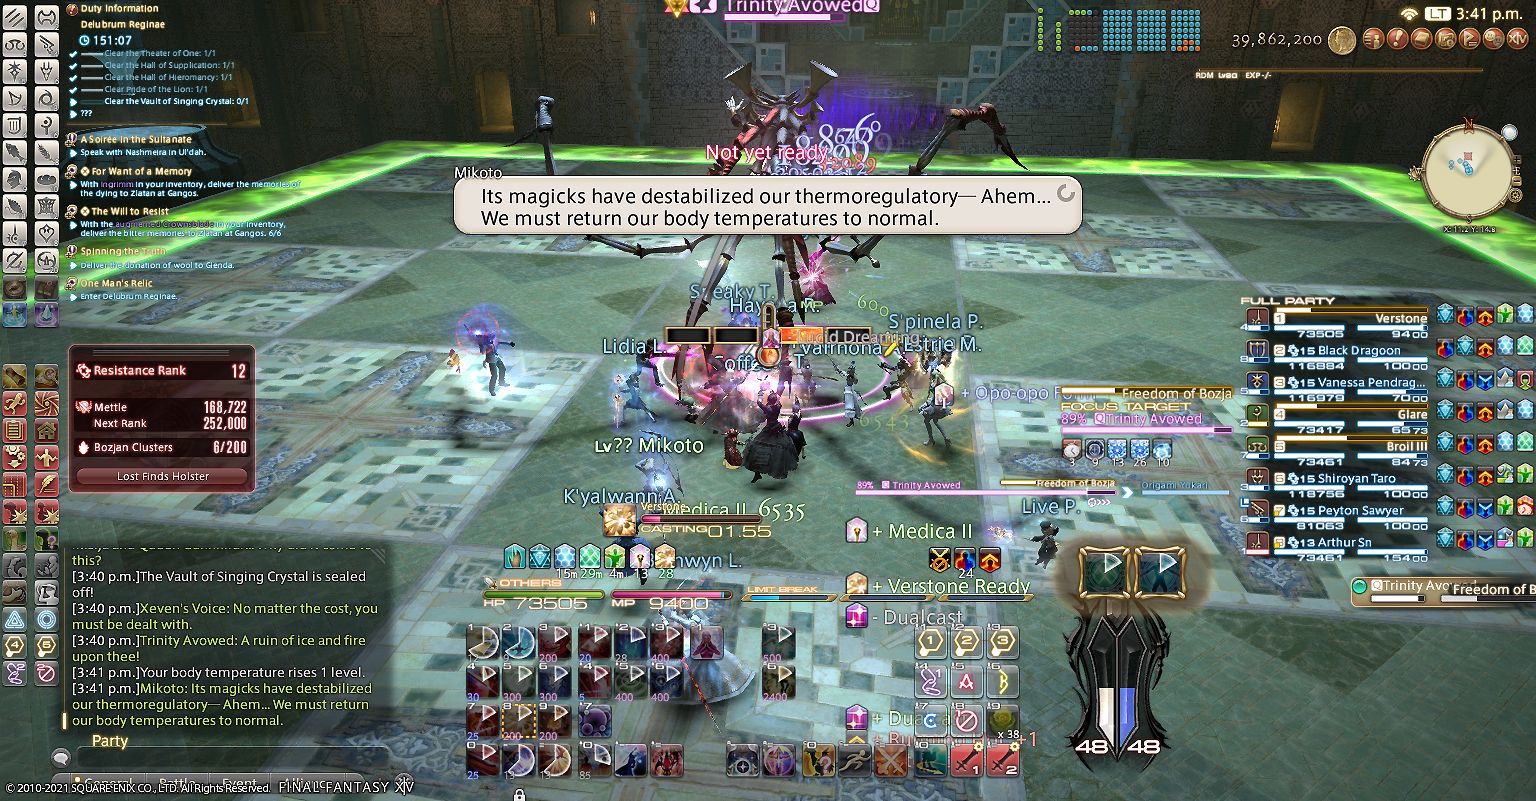 Trinity Avowed Hot and Cold Final Fantasy 14